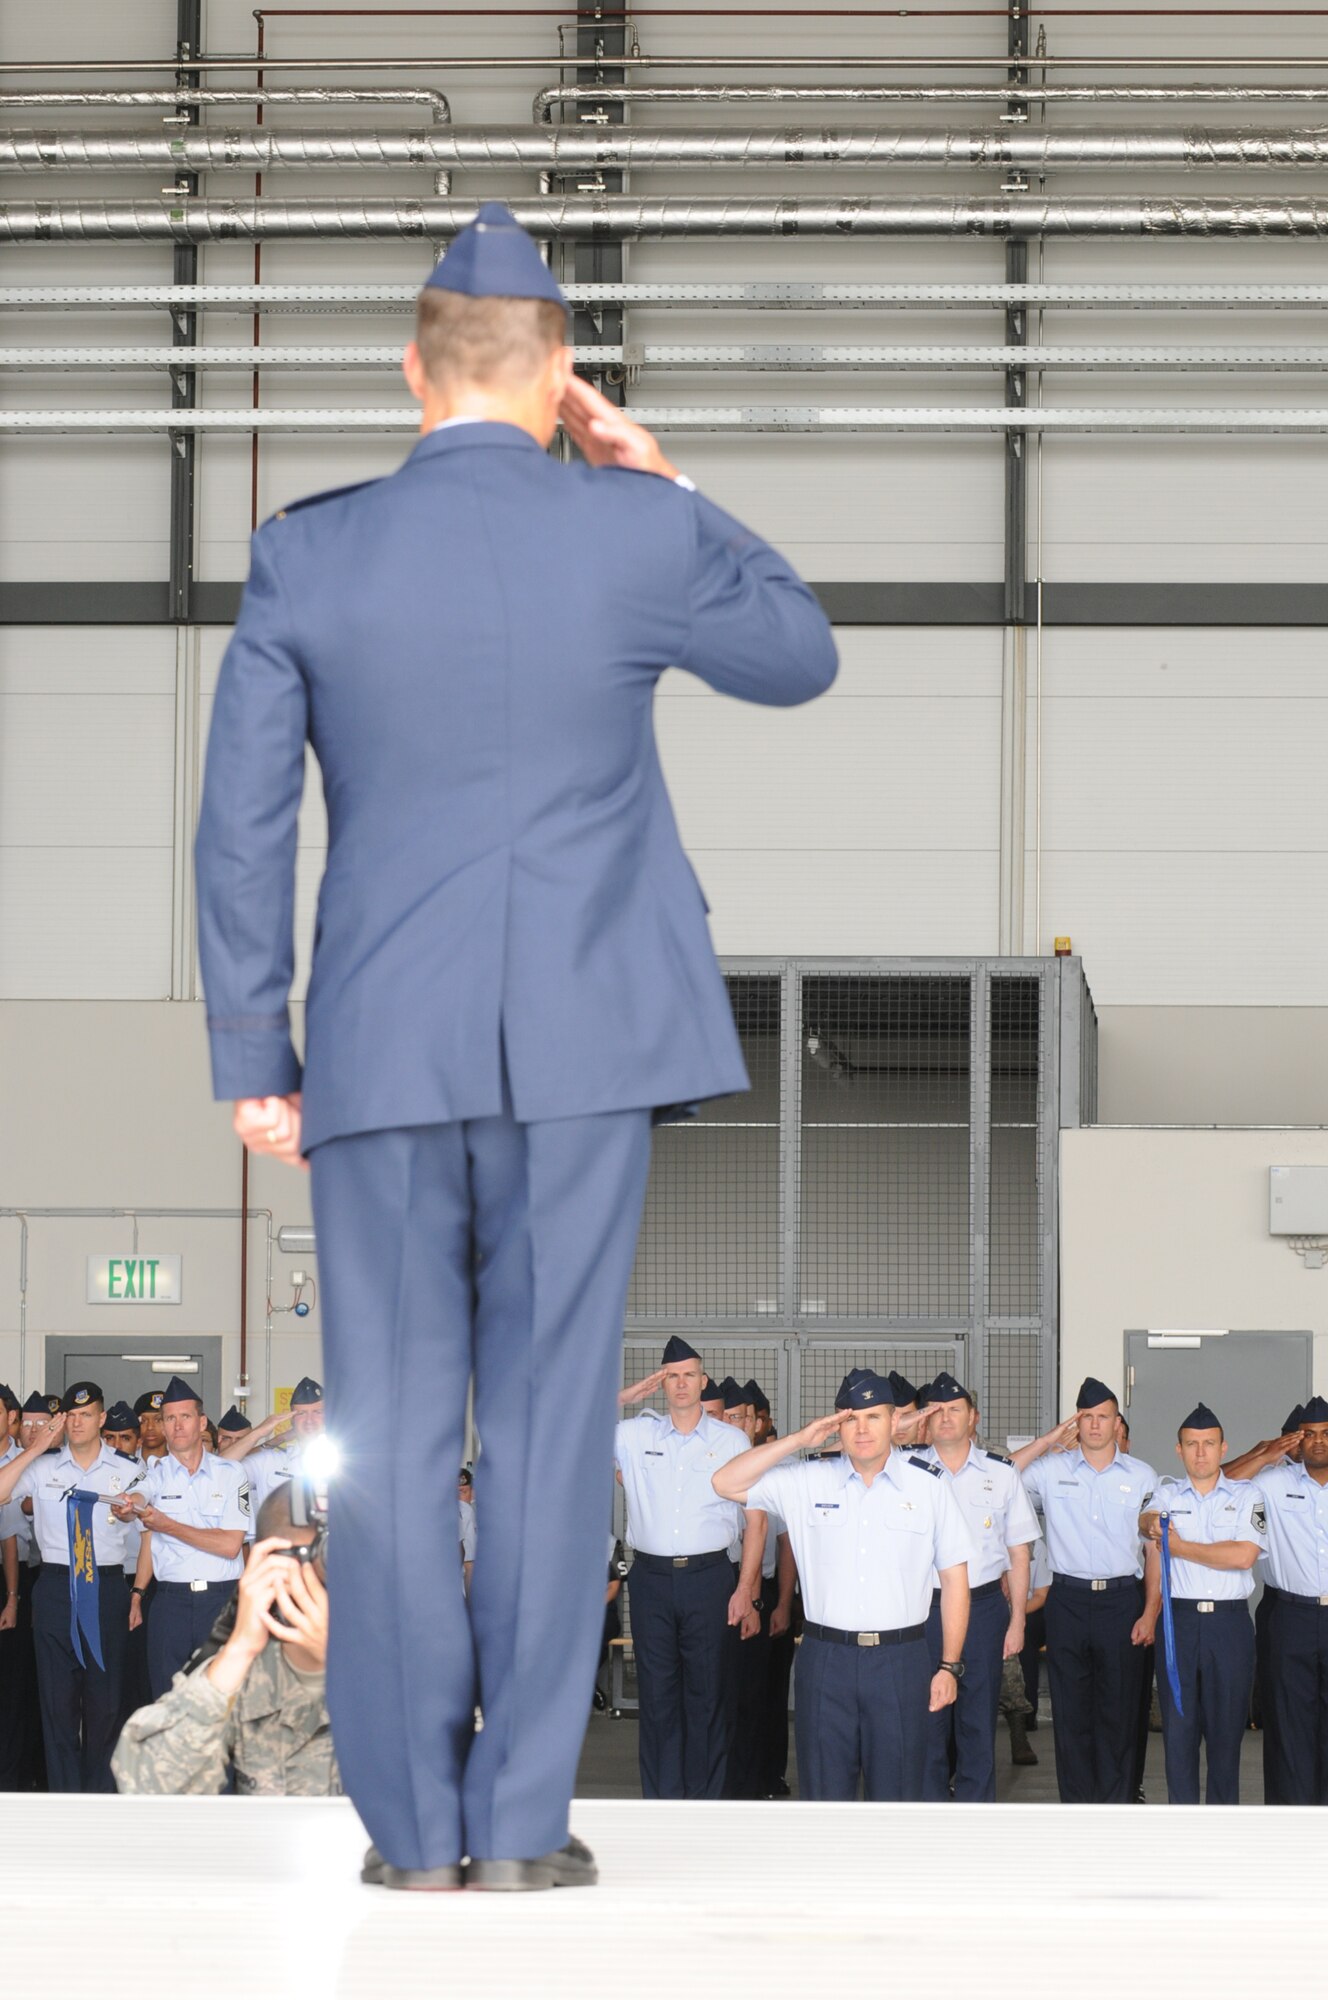 U.S. Air Force Col. Mark Dillon salutes the members of the 86th Airlift Wing on Ramstein Air Base for the first time as the new wing commander.  Colonel Dillon, Brig. Gen. select, assumed command from Brig. Gen. William Bender on July 31, 2009. (U.S. Air force photo By: Tech. Sgt. Sean Mateo White)